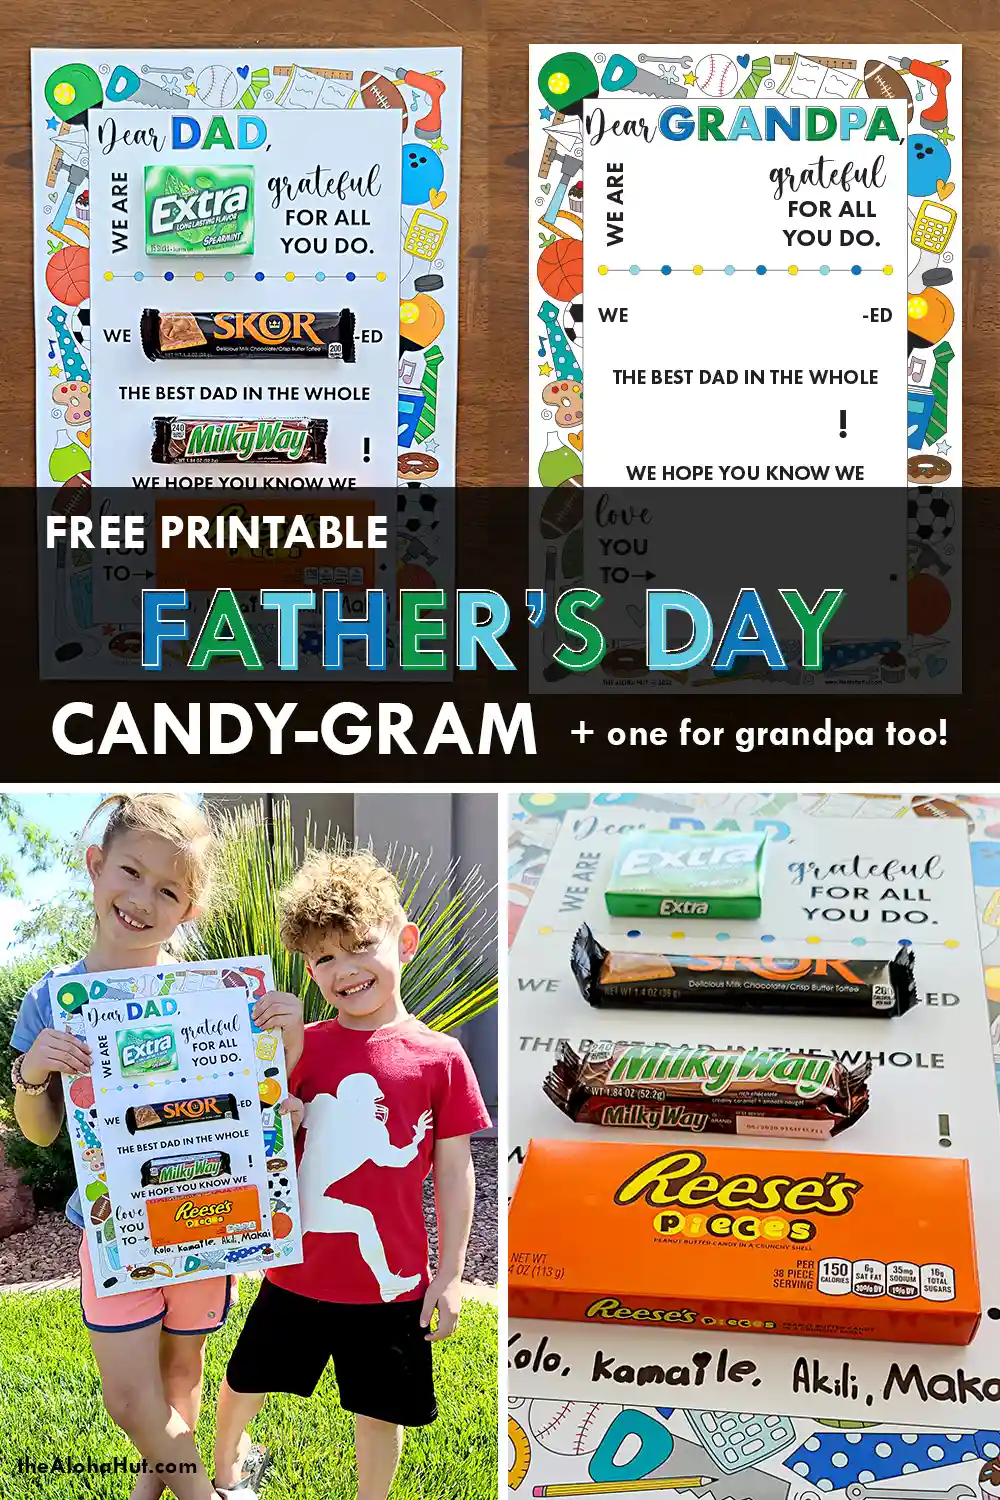 Easy Father's Day gift ideas for dad and grandpa. Print our giant candy gram card for dad and for grandpa, attach candy, and sign your name! Easy and simple gift dad will love. Download the printable giant Father's Day card for a last minute gift this year.